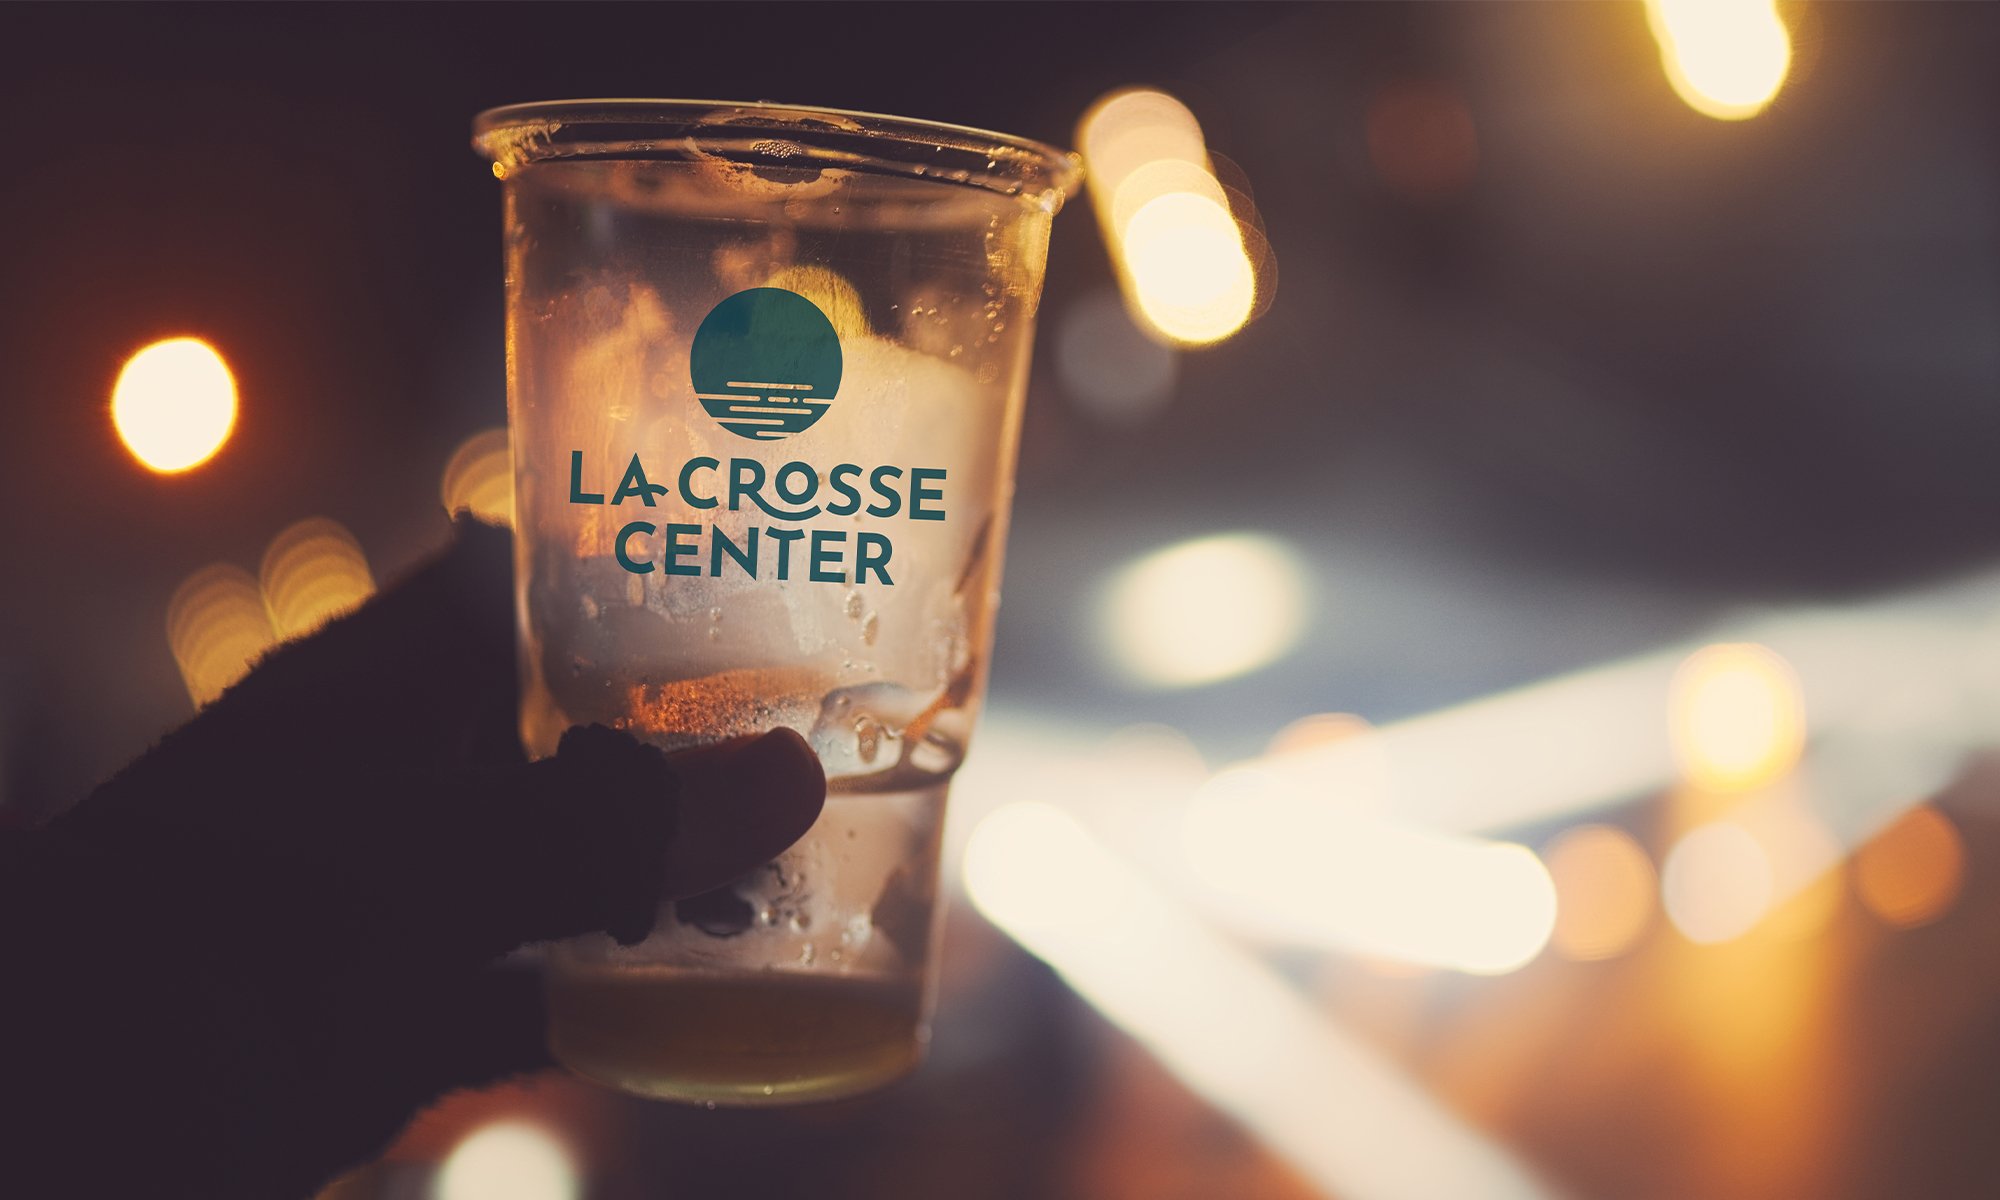 Full-color La Crosse Center brand logo created by Vendi on a plastic cup, demonstrating possible logo placement opportunity